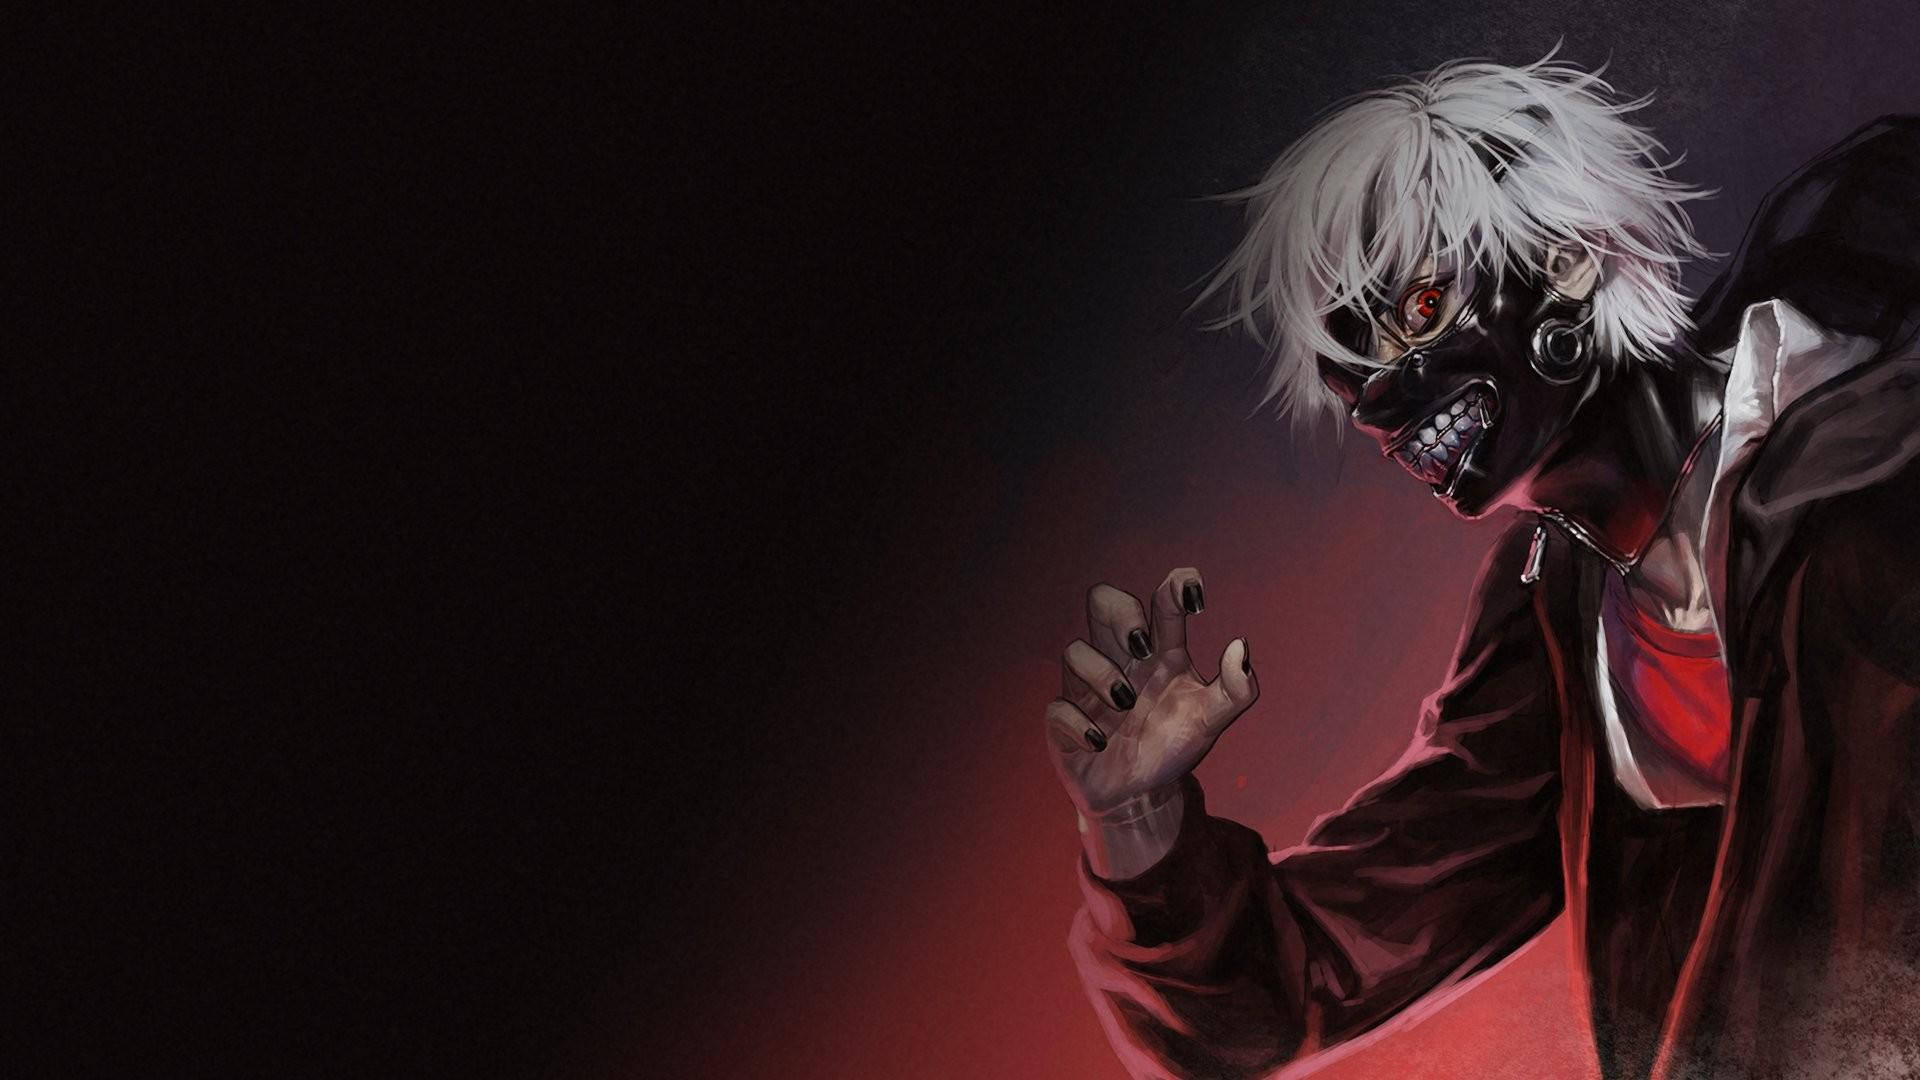 Free Scary Anime Boy Wallpaper Downloads, [100+] Scary Anime Boy Wallpapers  for FREE 